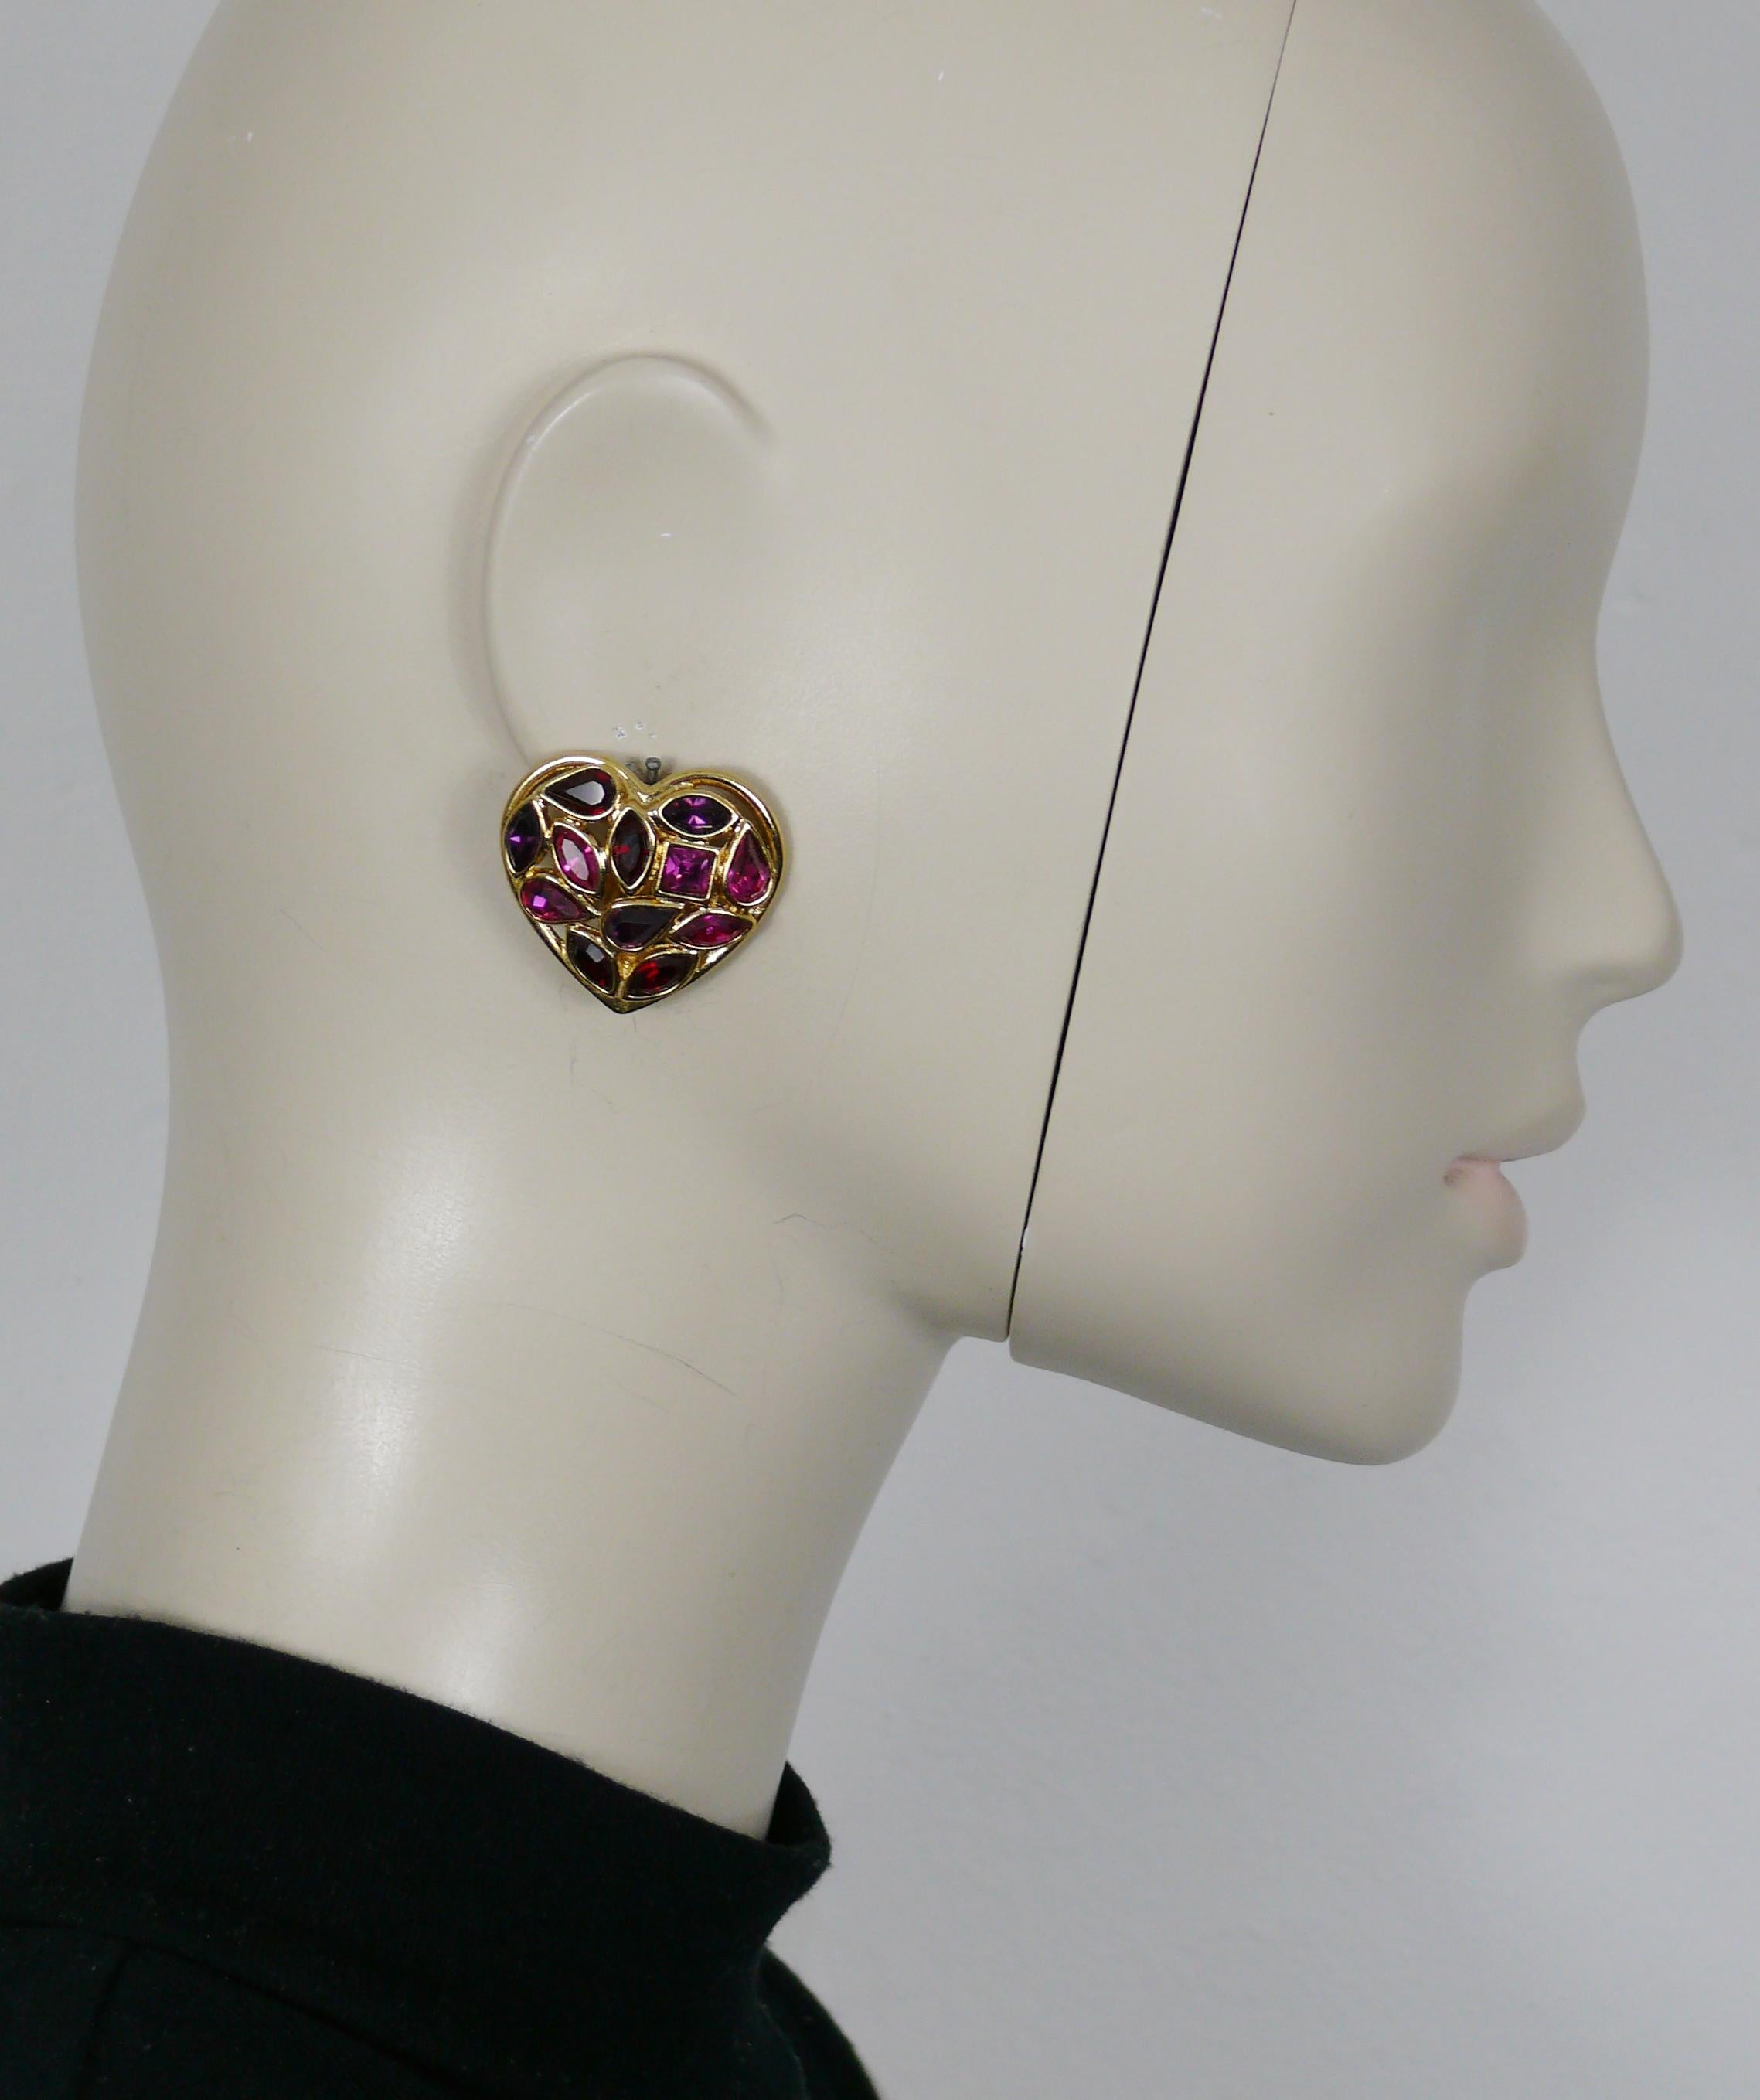 YVES SAINT LAURENT vintage gold tone heart clip-on earrings embellished with fuschia and purple crystals.

Embossed YSL Made in France.

Indicative measurements : max. height approx. 2.9 cm (1.14 inches) / max. width approx. 3.2 cm (1.26